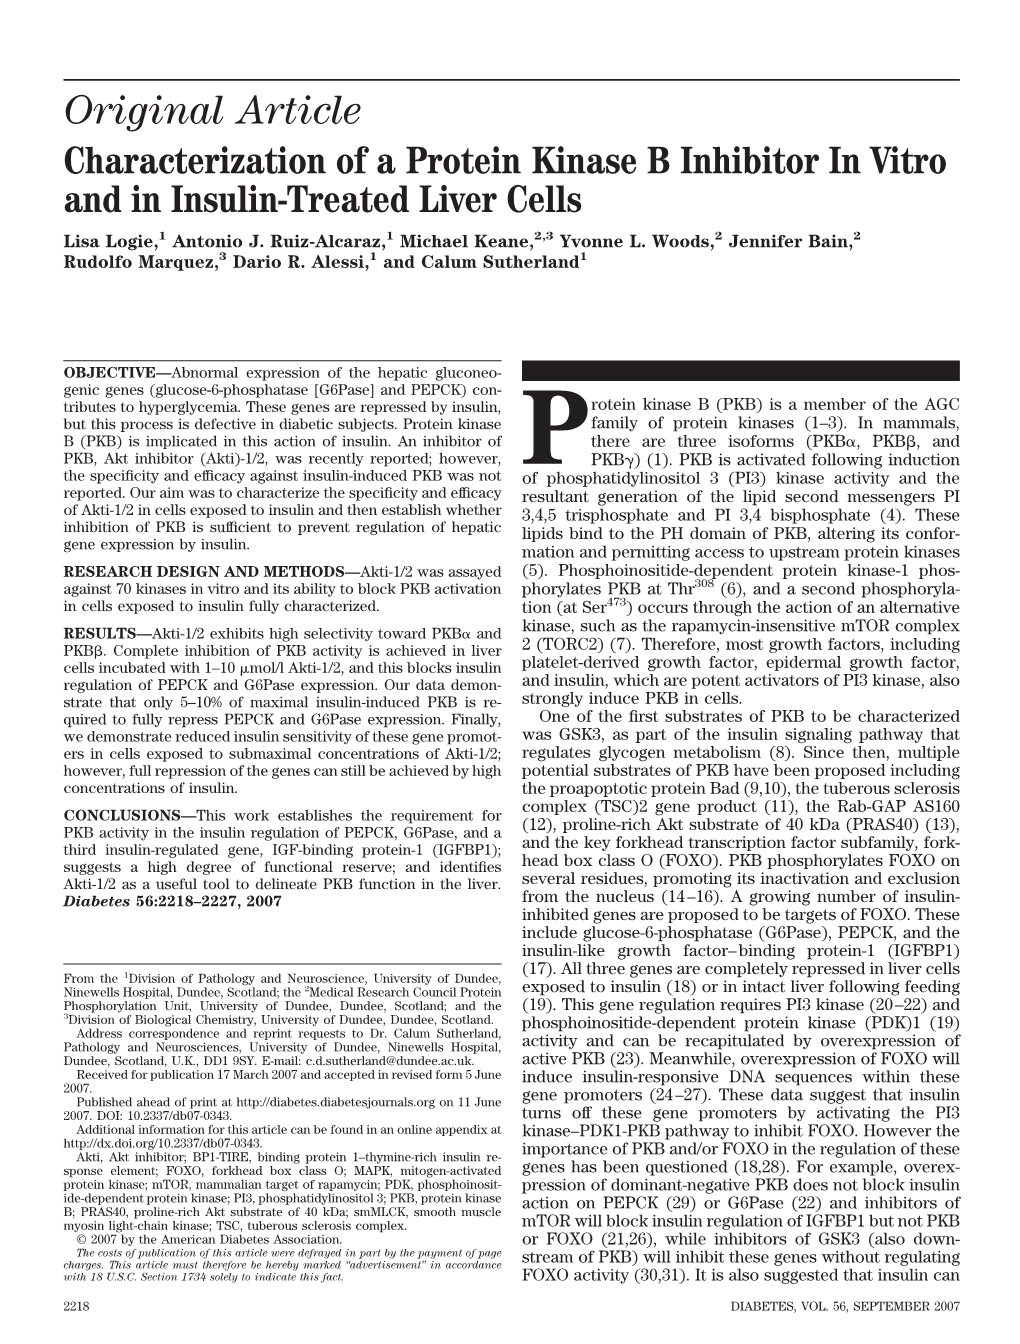 Characterization of a Protein Kinase B Inhibitor in Vitro and in Insulin-Treated Liver Cells Lisa Logie,1 Antonio J